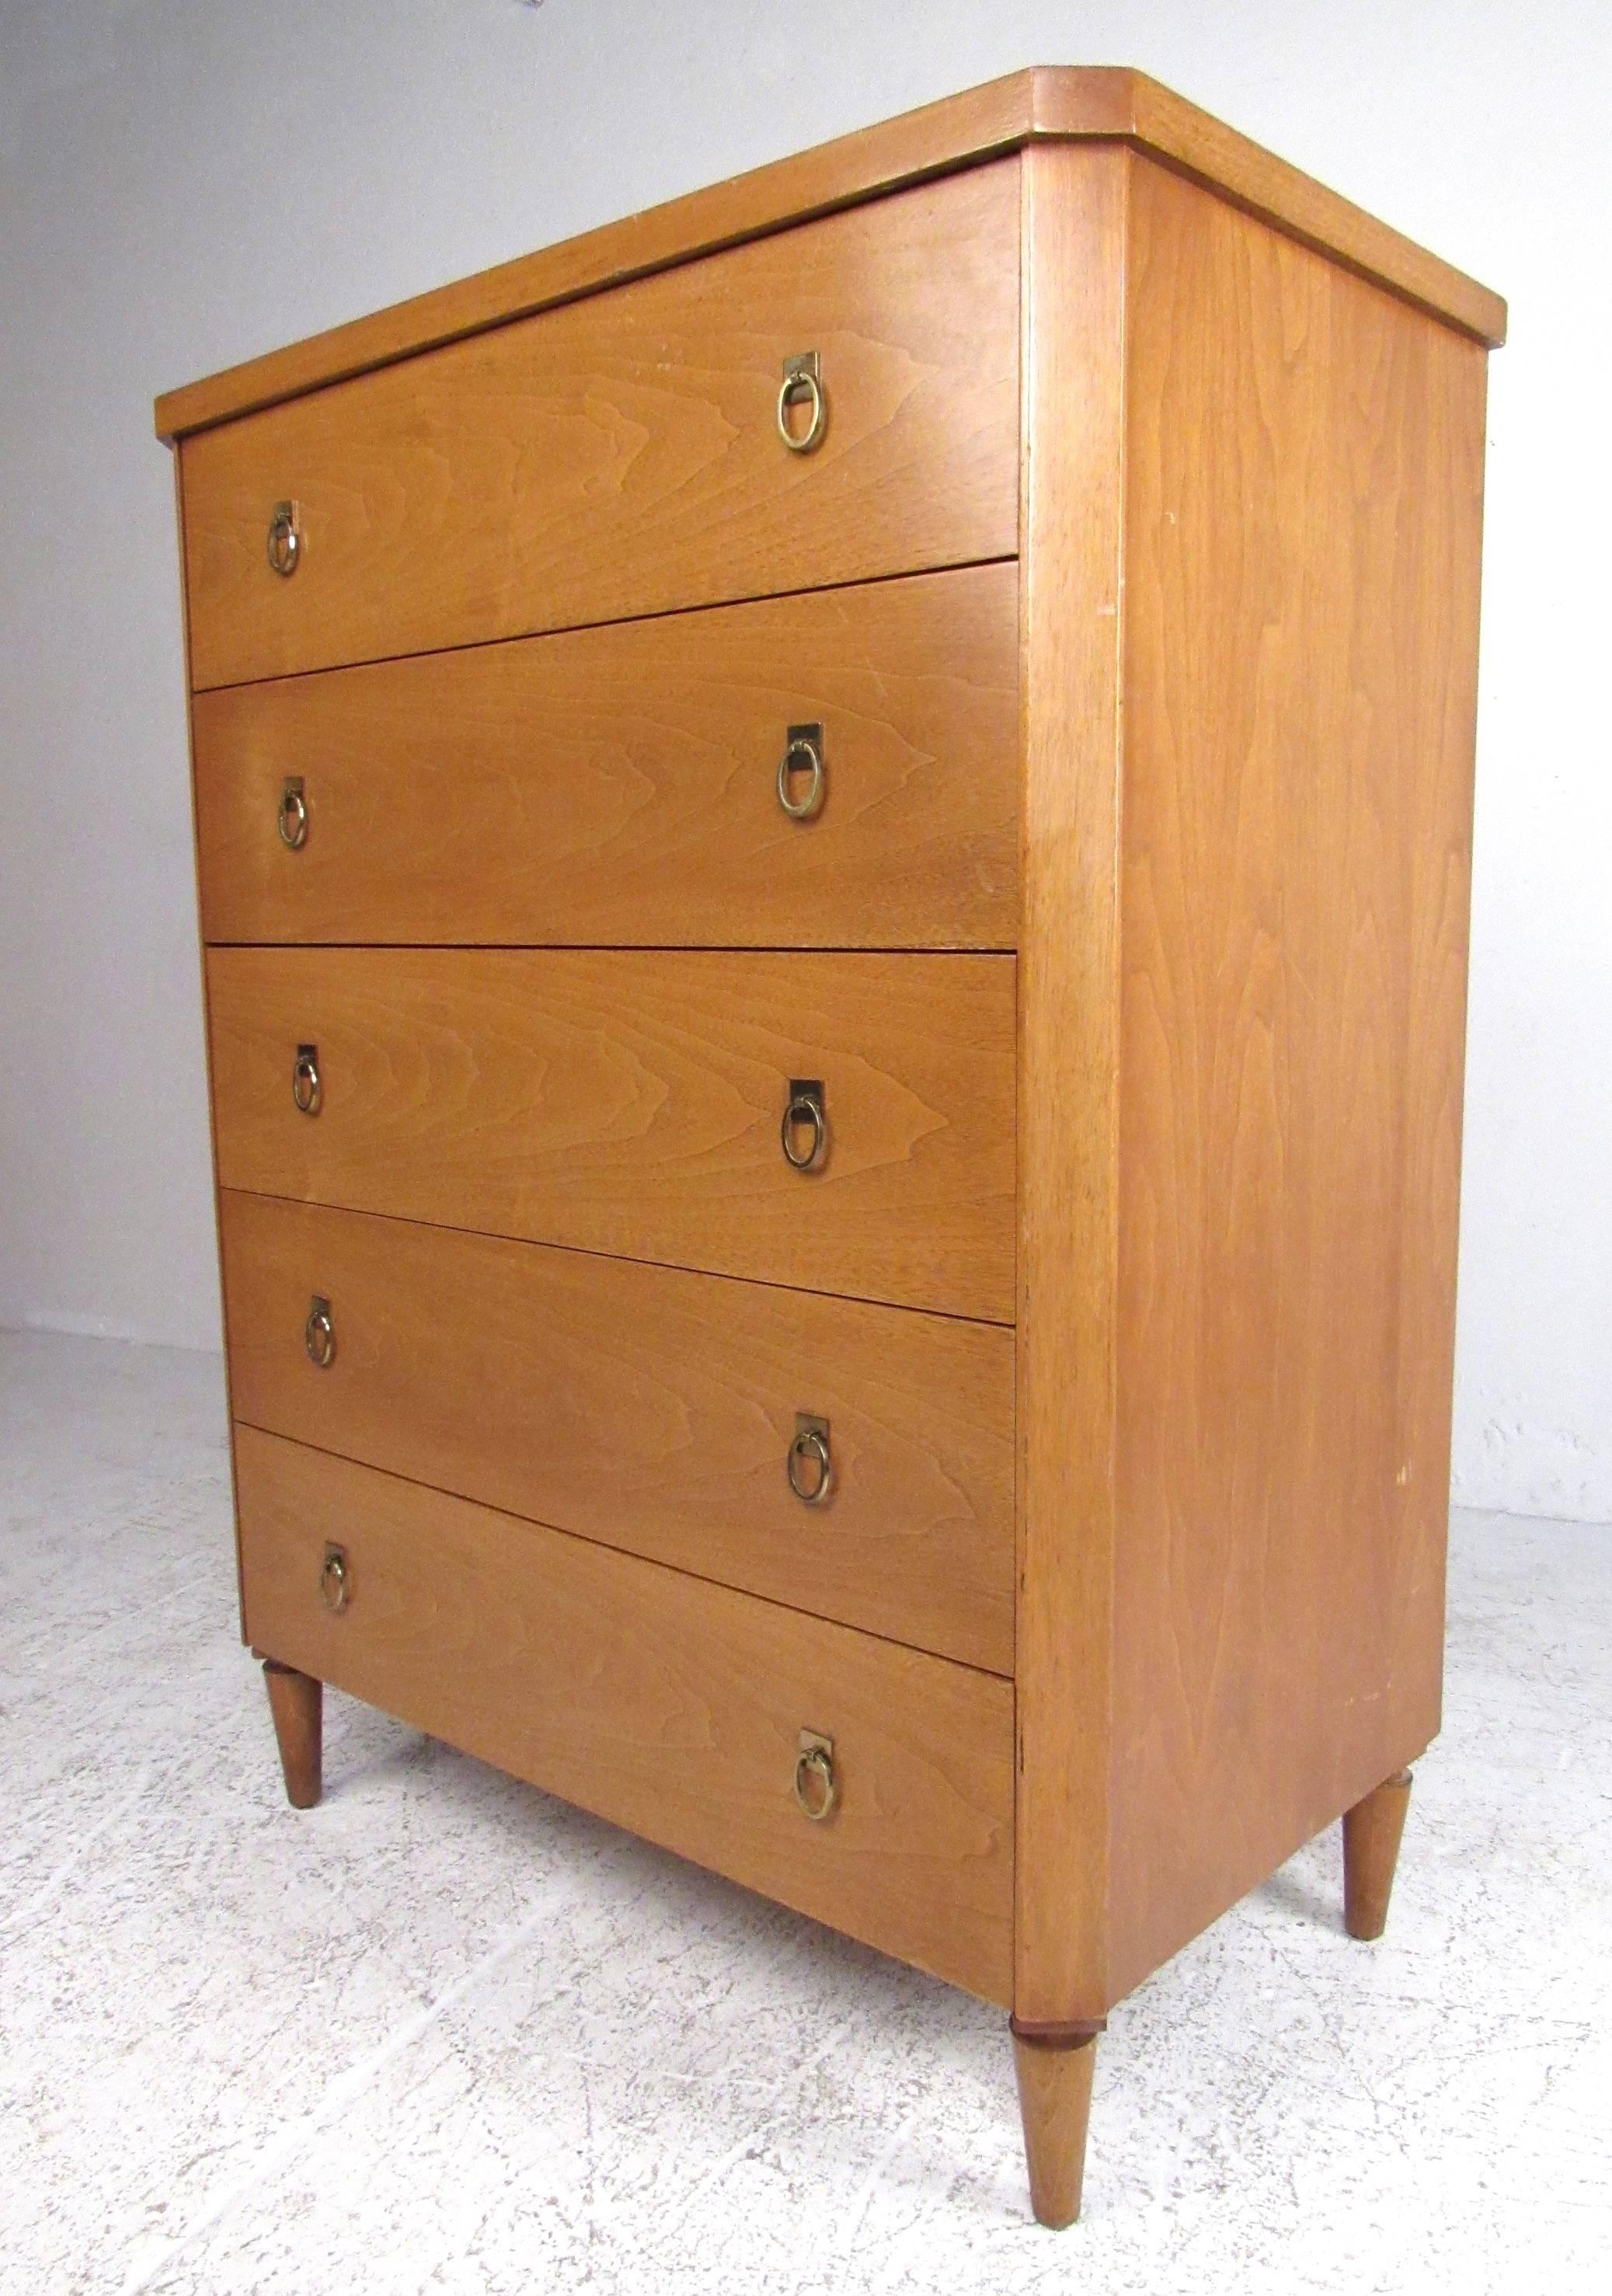 Pair of Mid-Century Modern walnut dressers designed by T.H. Robsjohn-Gibbings for Widdicomb. Long, low six-drawer dresser with four partitioned drawers (removable), and matching five drawer highboy. These are well constructed cabinets with oak